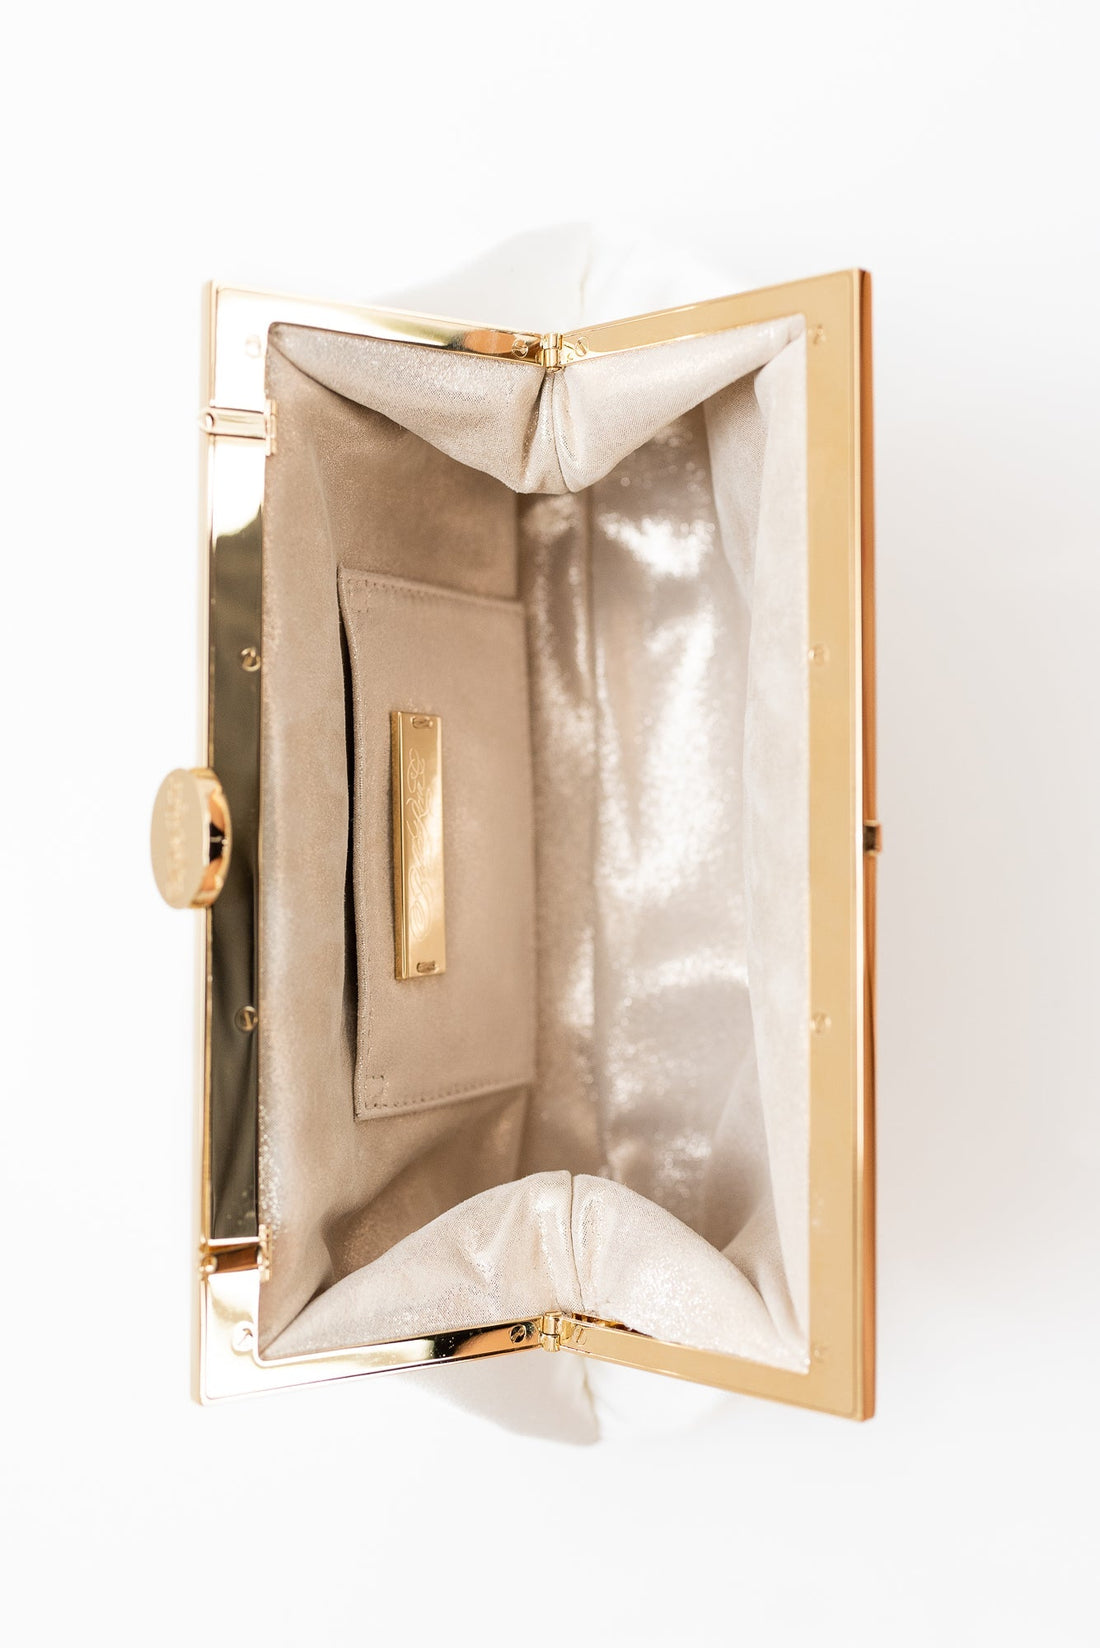 Open view inside Rosa Clutch in Ivory white satin with gold hardware clasp frame.